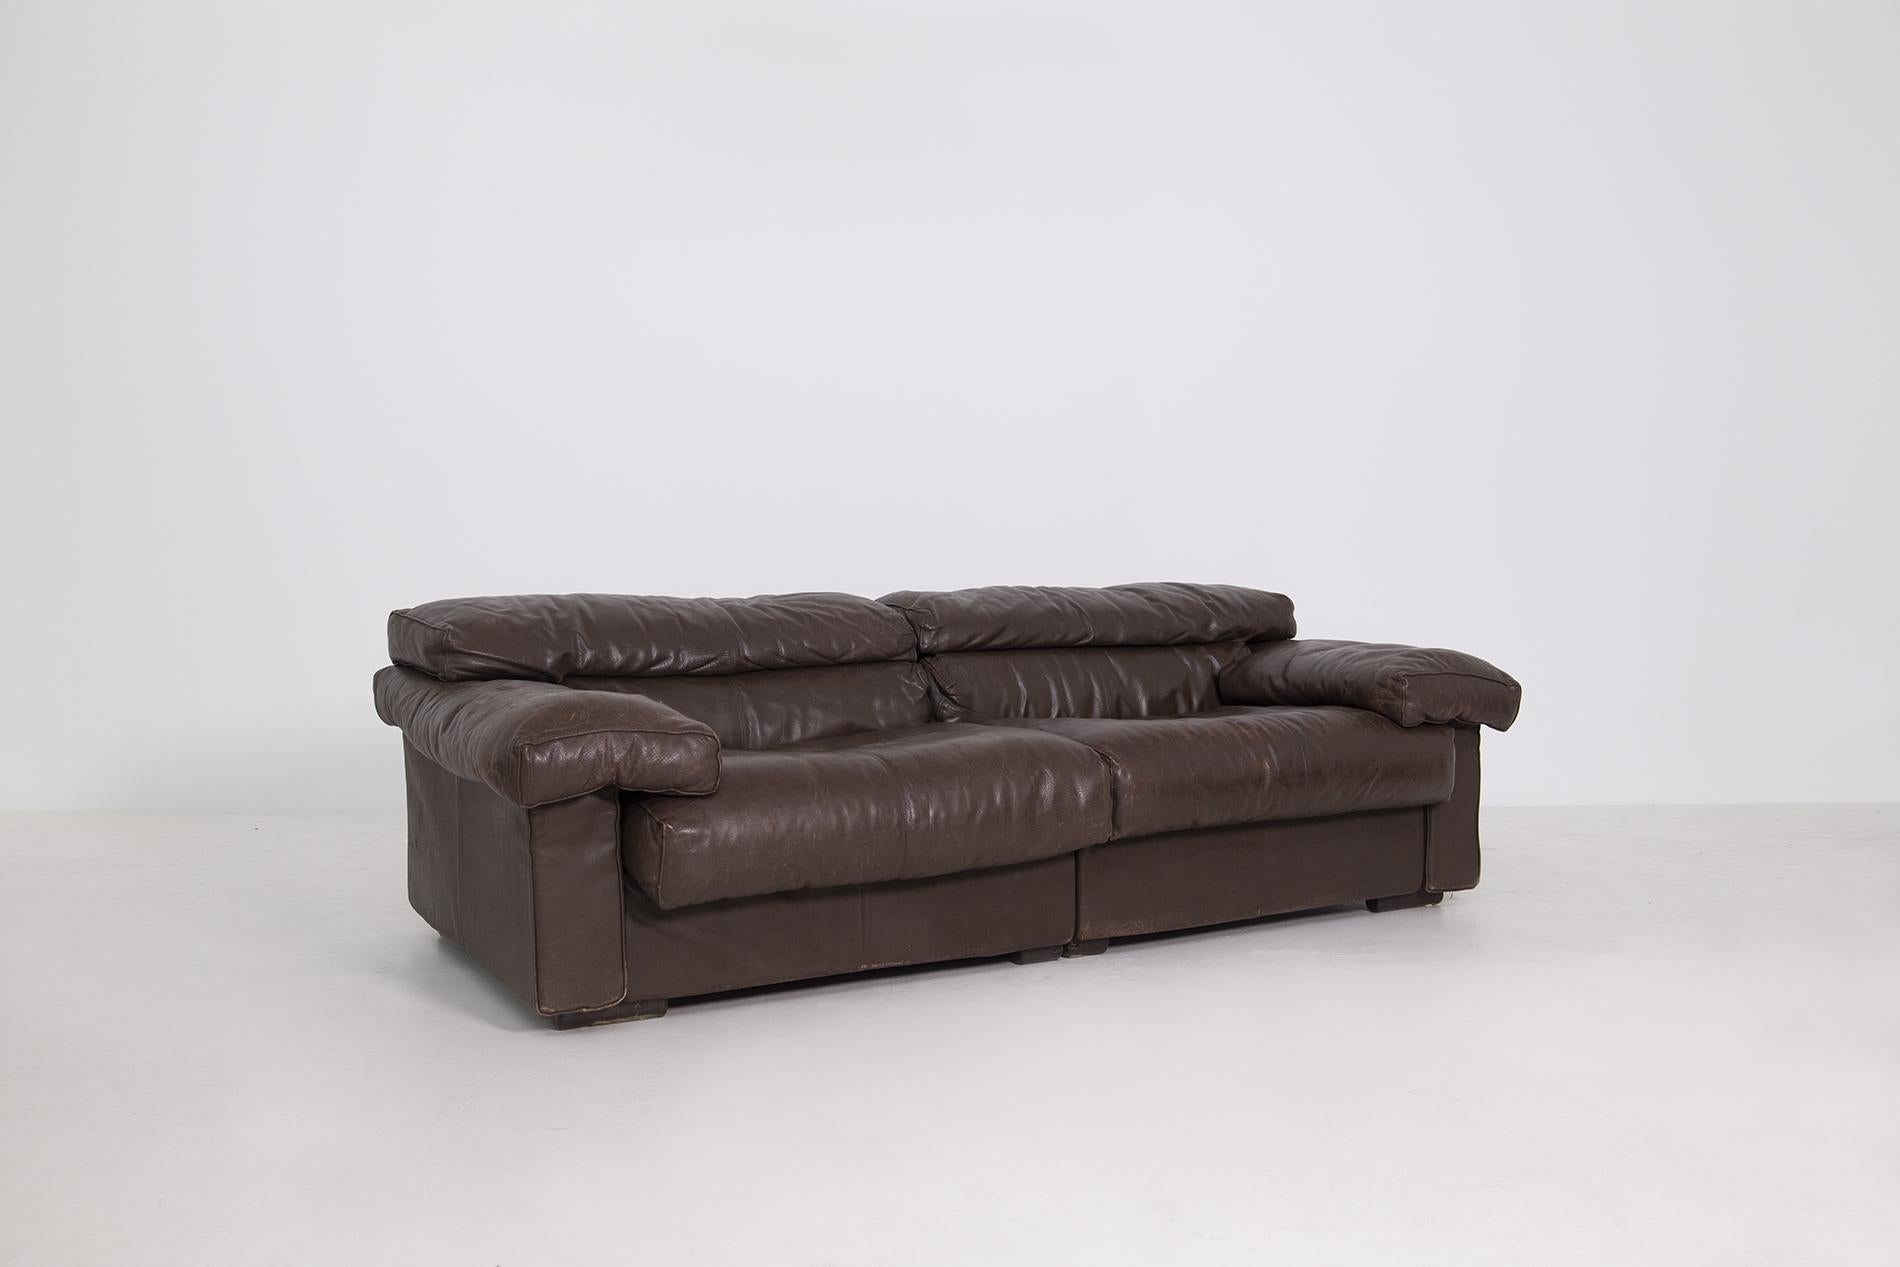 Tobia Scarpa modern sofa model Erasmo of 1973 designed by Tobia Scarpa for the Italian manufacture B&B Italia. The sofa is a two-seater. The structure is in heavy wood in two parts, each on 2 brown plastic skids, connected to the center by loose